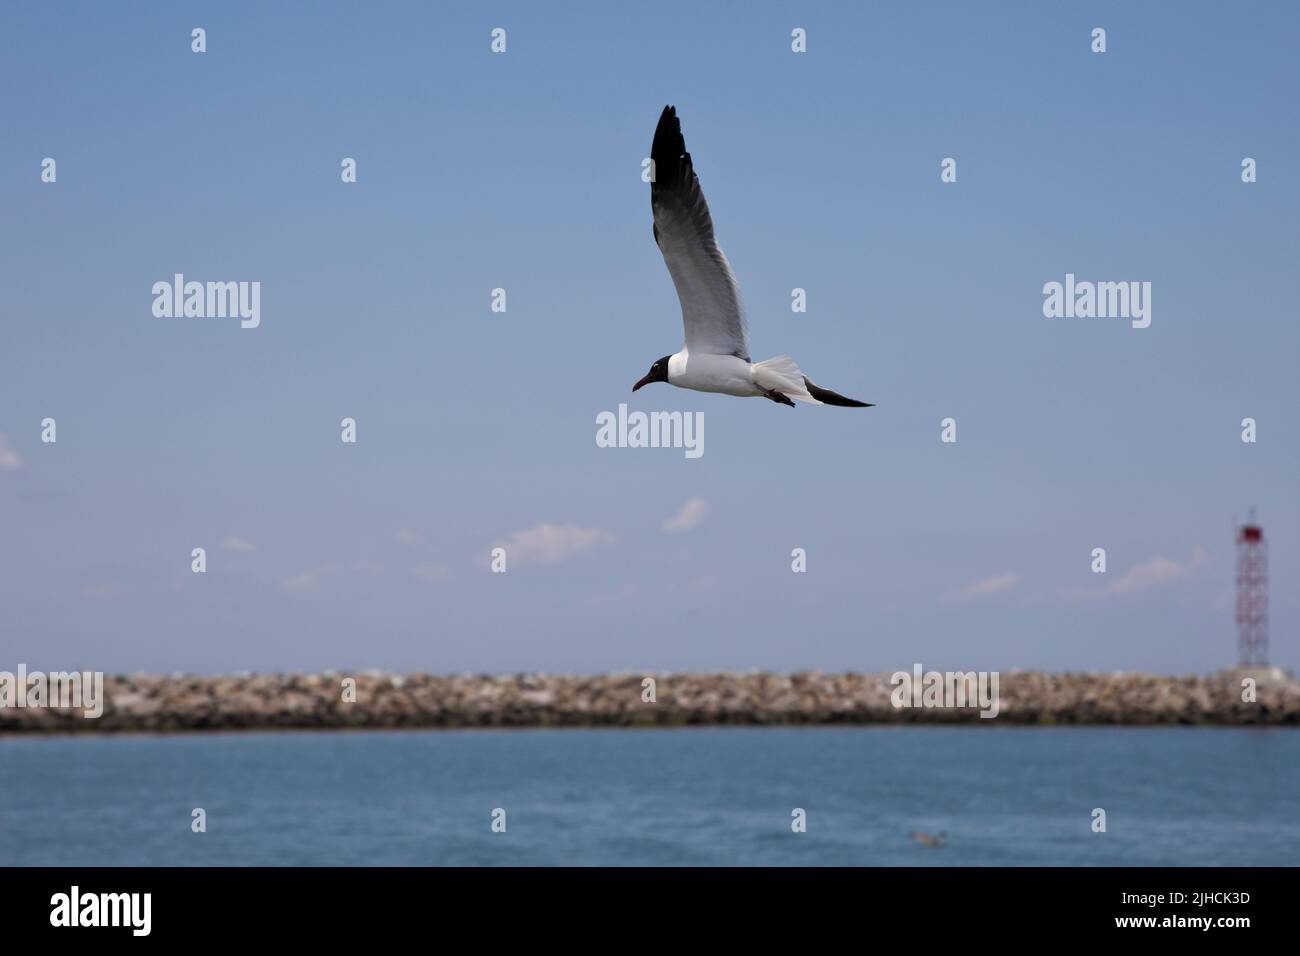 Seagull in flight against blue sky background. Stock Photo